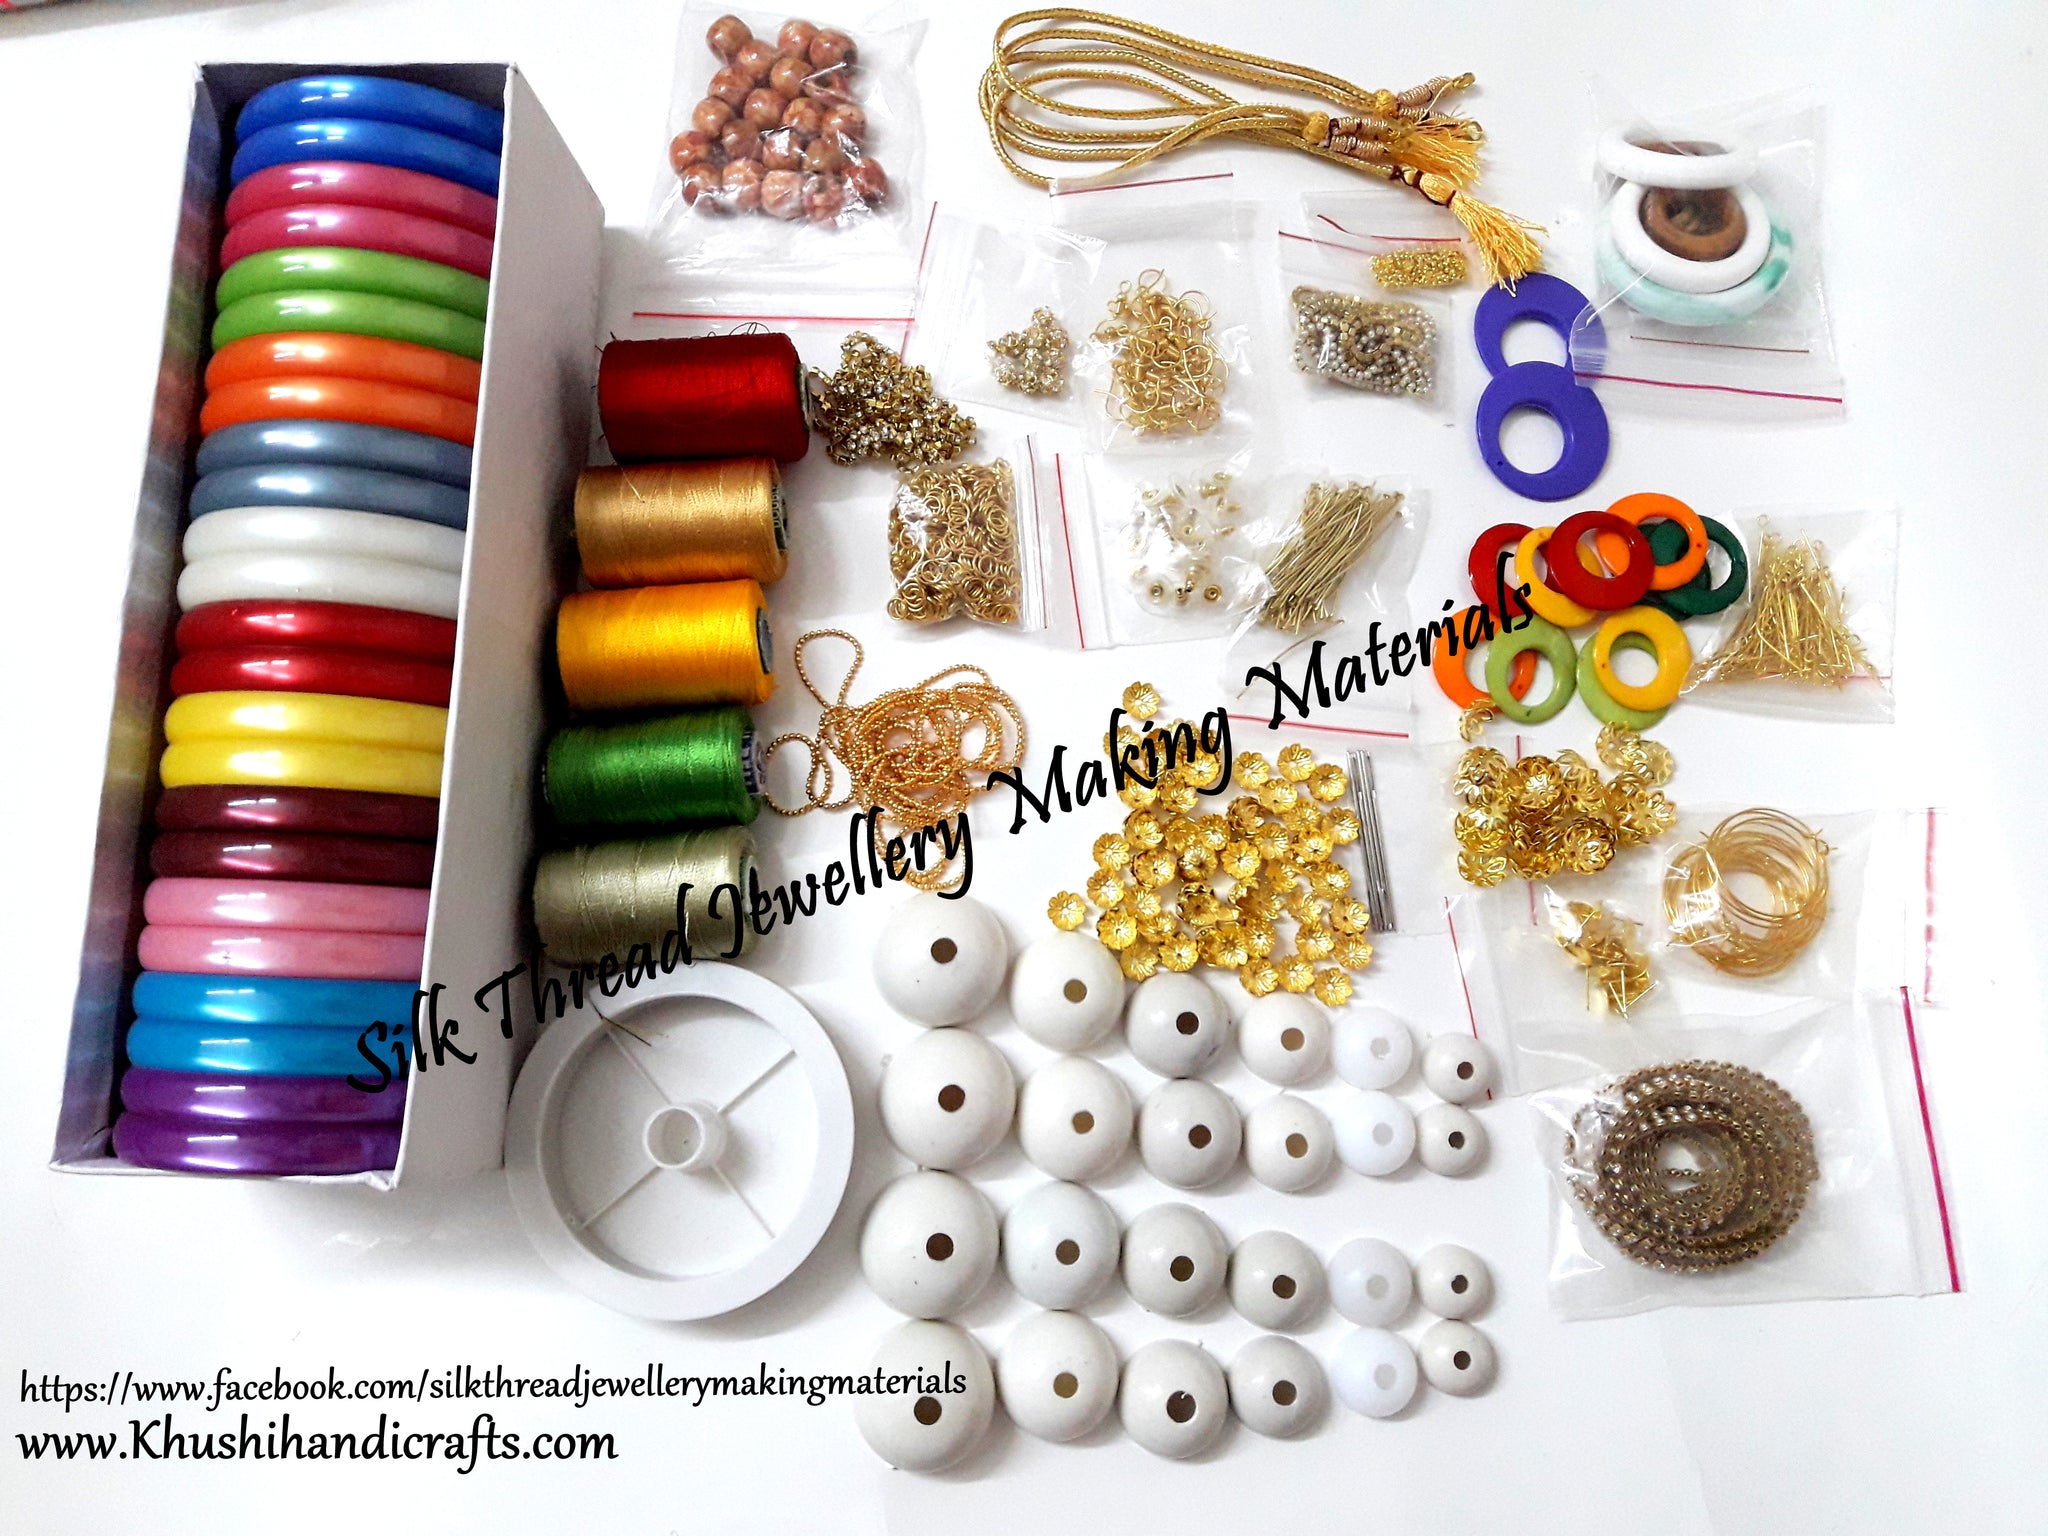 Clay Beads Vivid Colors for Jewelry Necklace Bracelet Making Kit